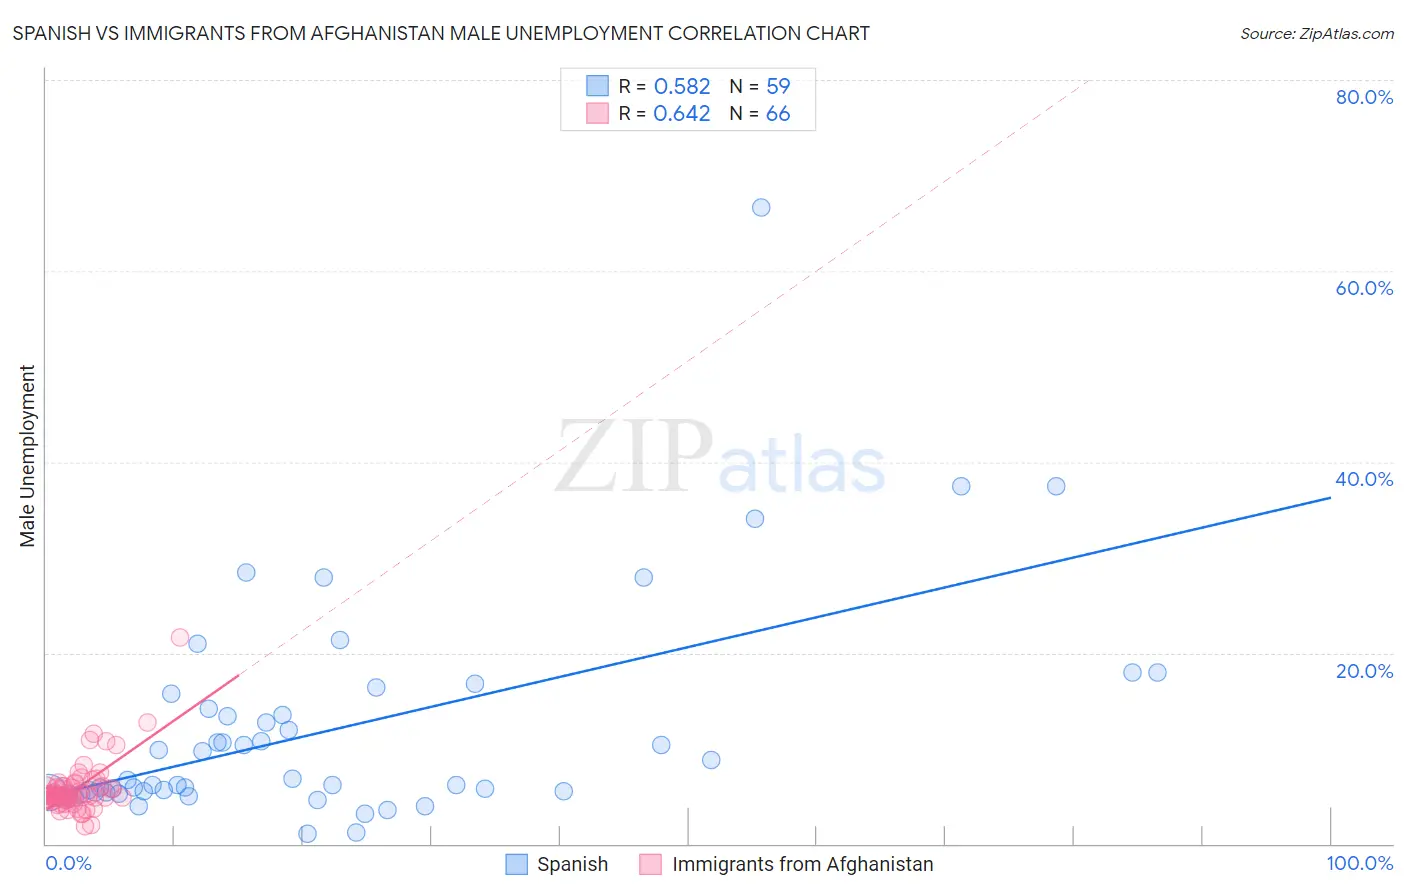 Spanish vs Immigrants from Afghanistan Male Unemployment